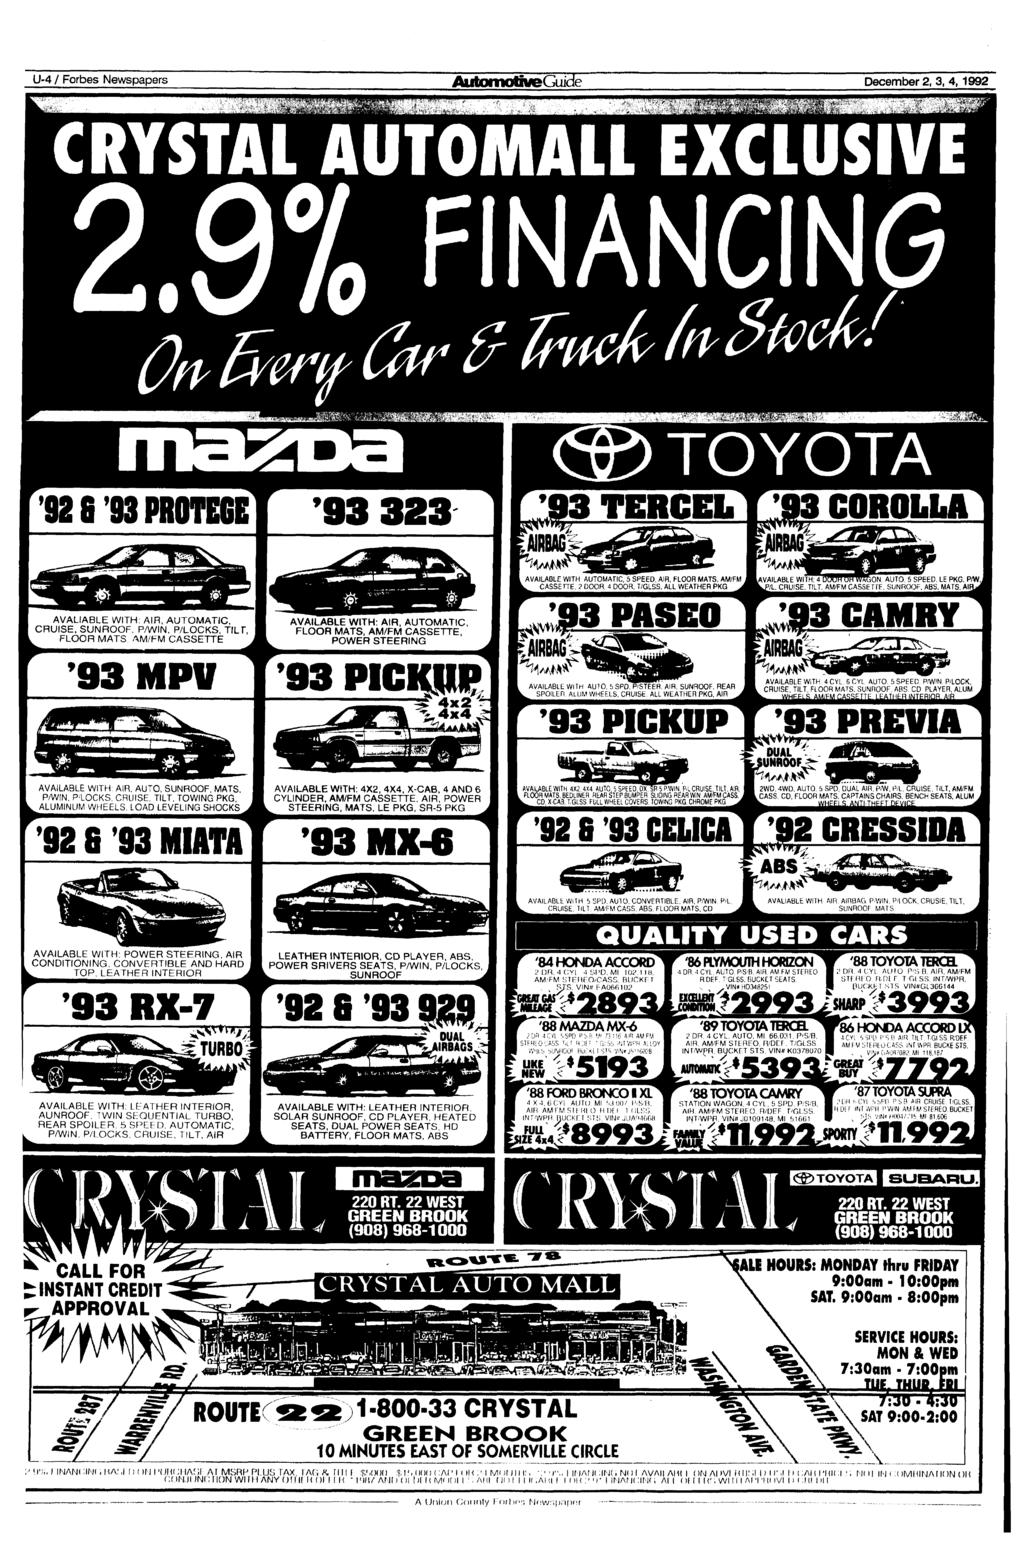 U-4 / Forbes Newspapers December 2, 3, 4,1992 '^^^i^dmimsim CRYSTAL AUTOMALL EXCLUSIVE I3 TERCEL mis JRBAG COROLLA AVALIABLE WITH: AIR, AUTOMATIC, CRUISE, SUNROOF, P/WIN, P/LOCKS, TILT, FLOOR MATS